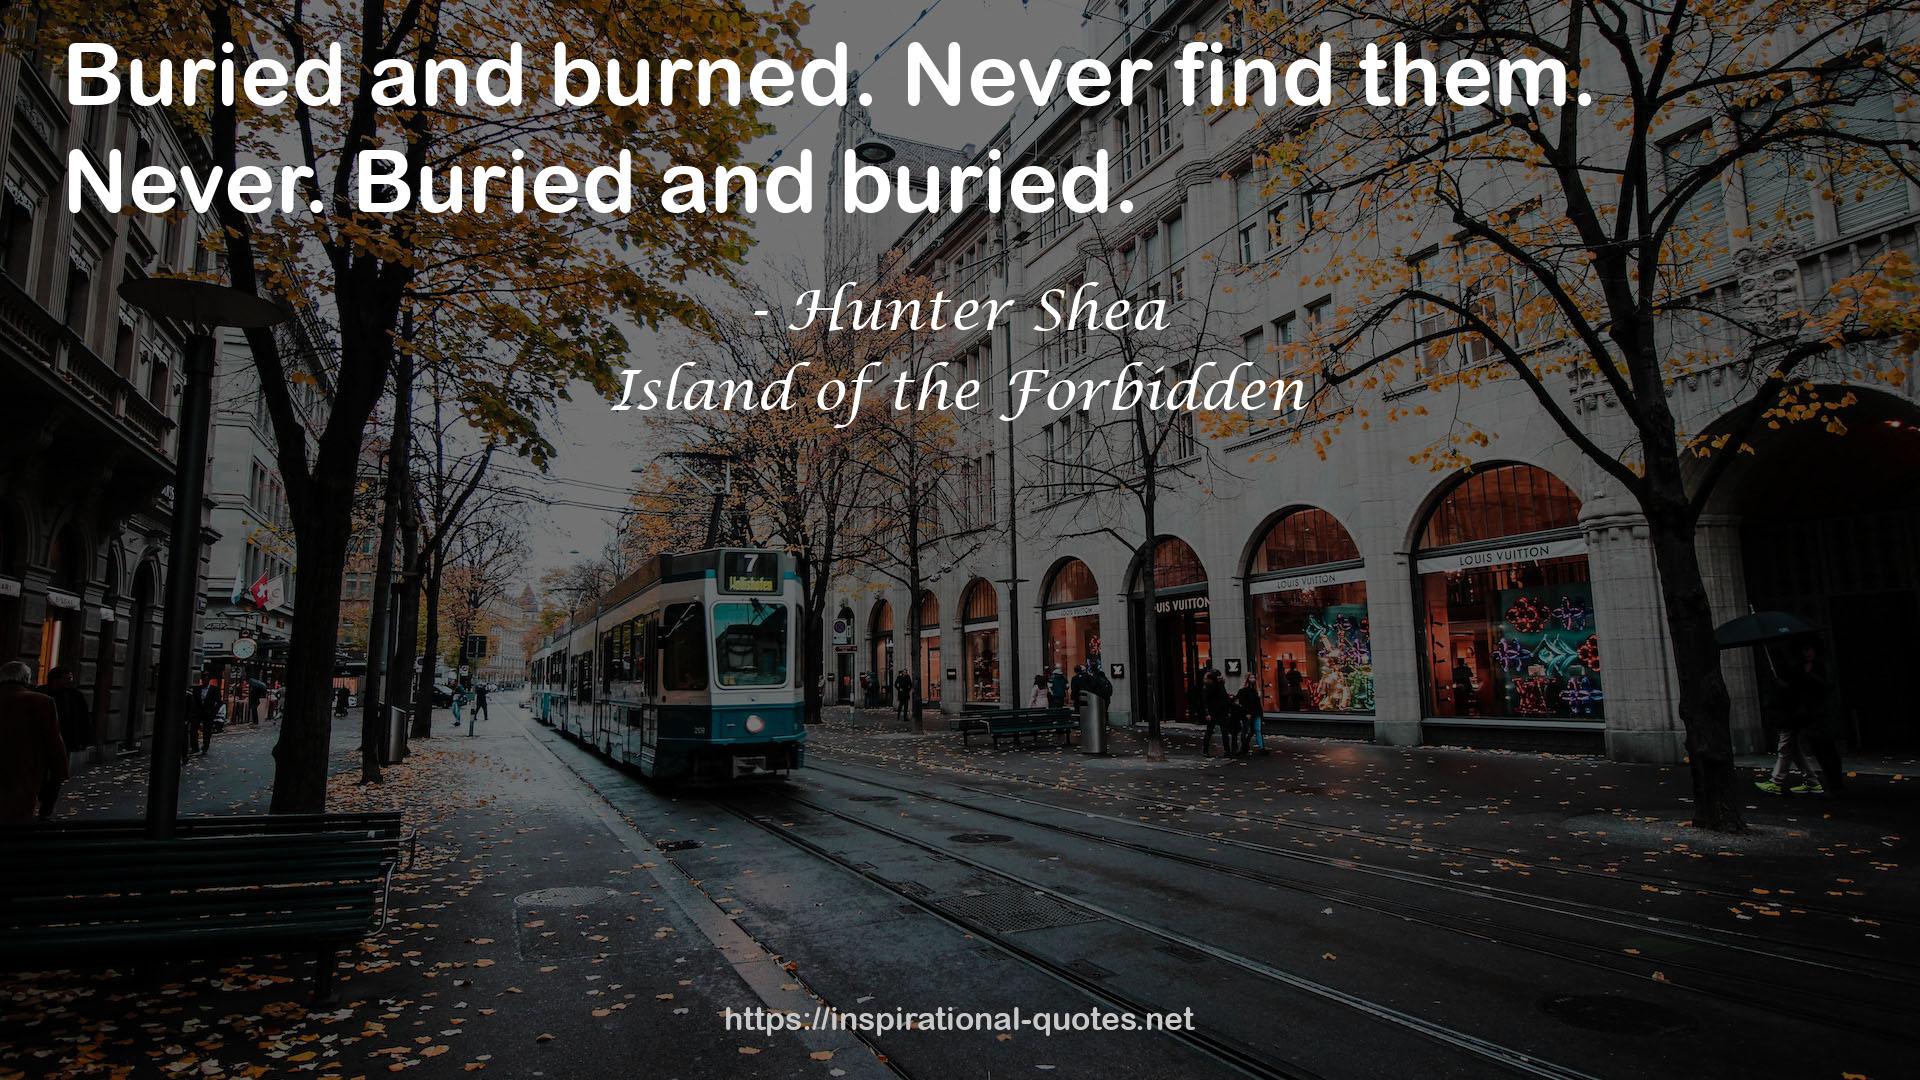 Island of the Forbidden QUOTES